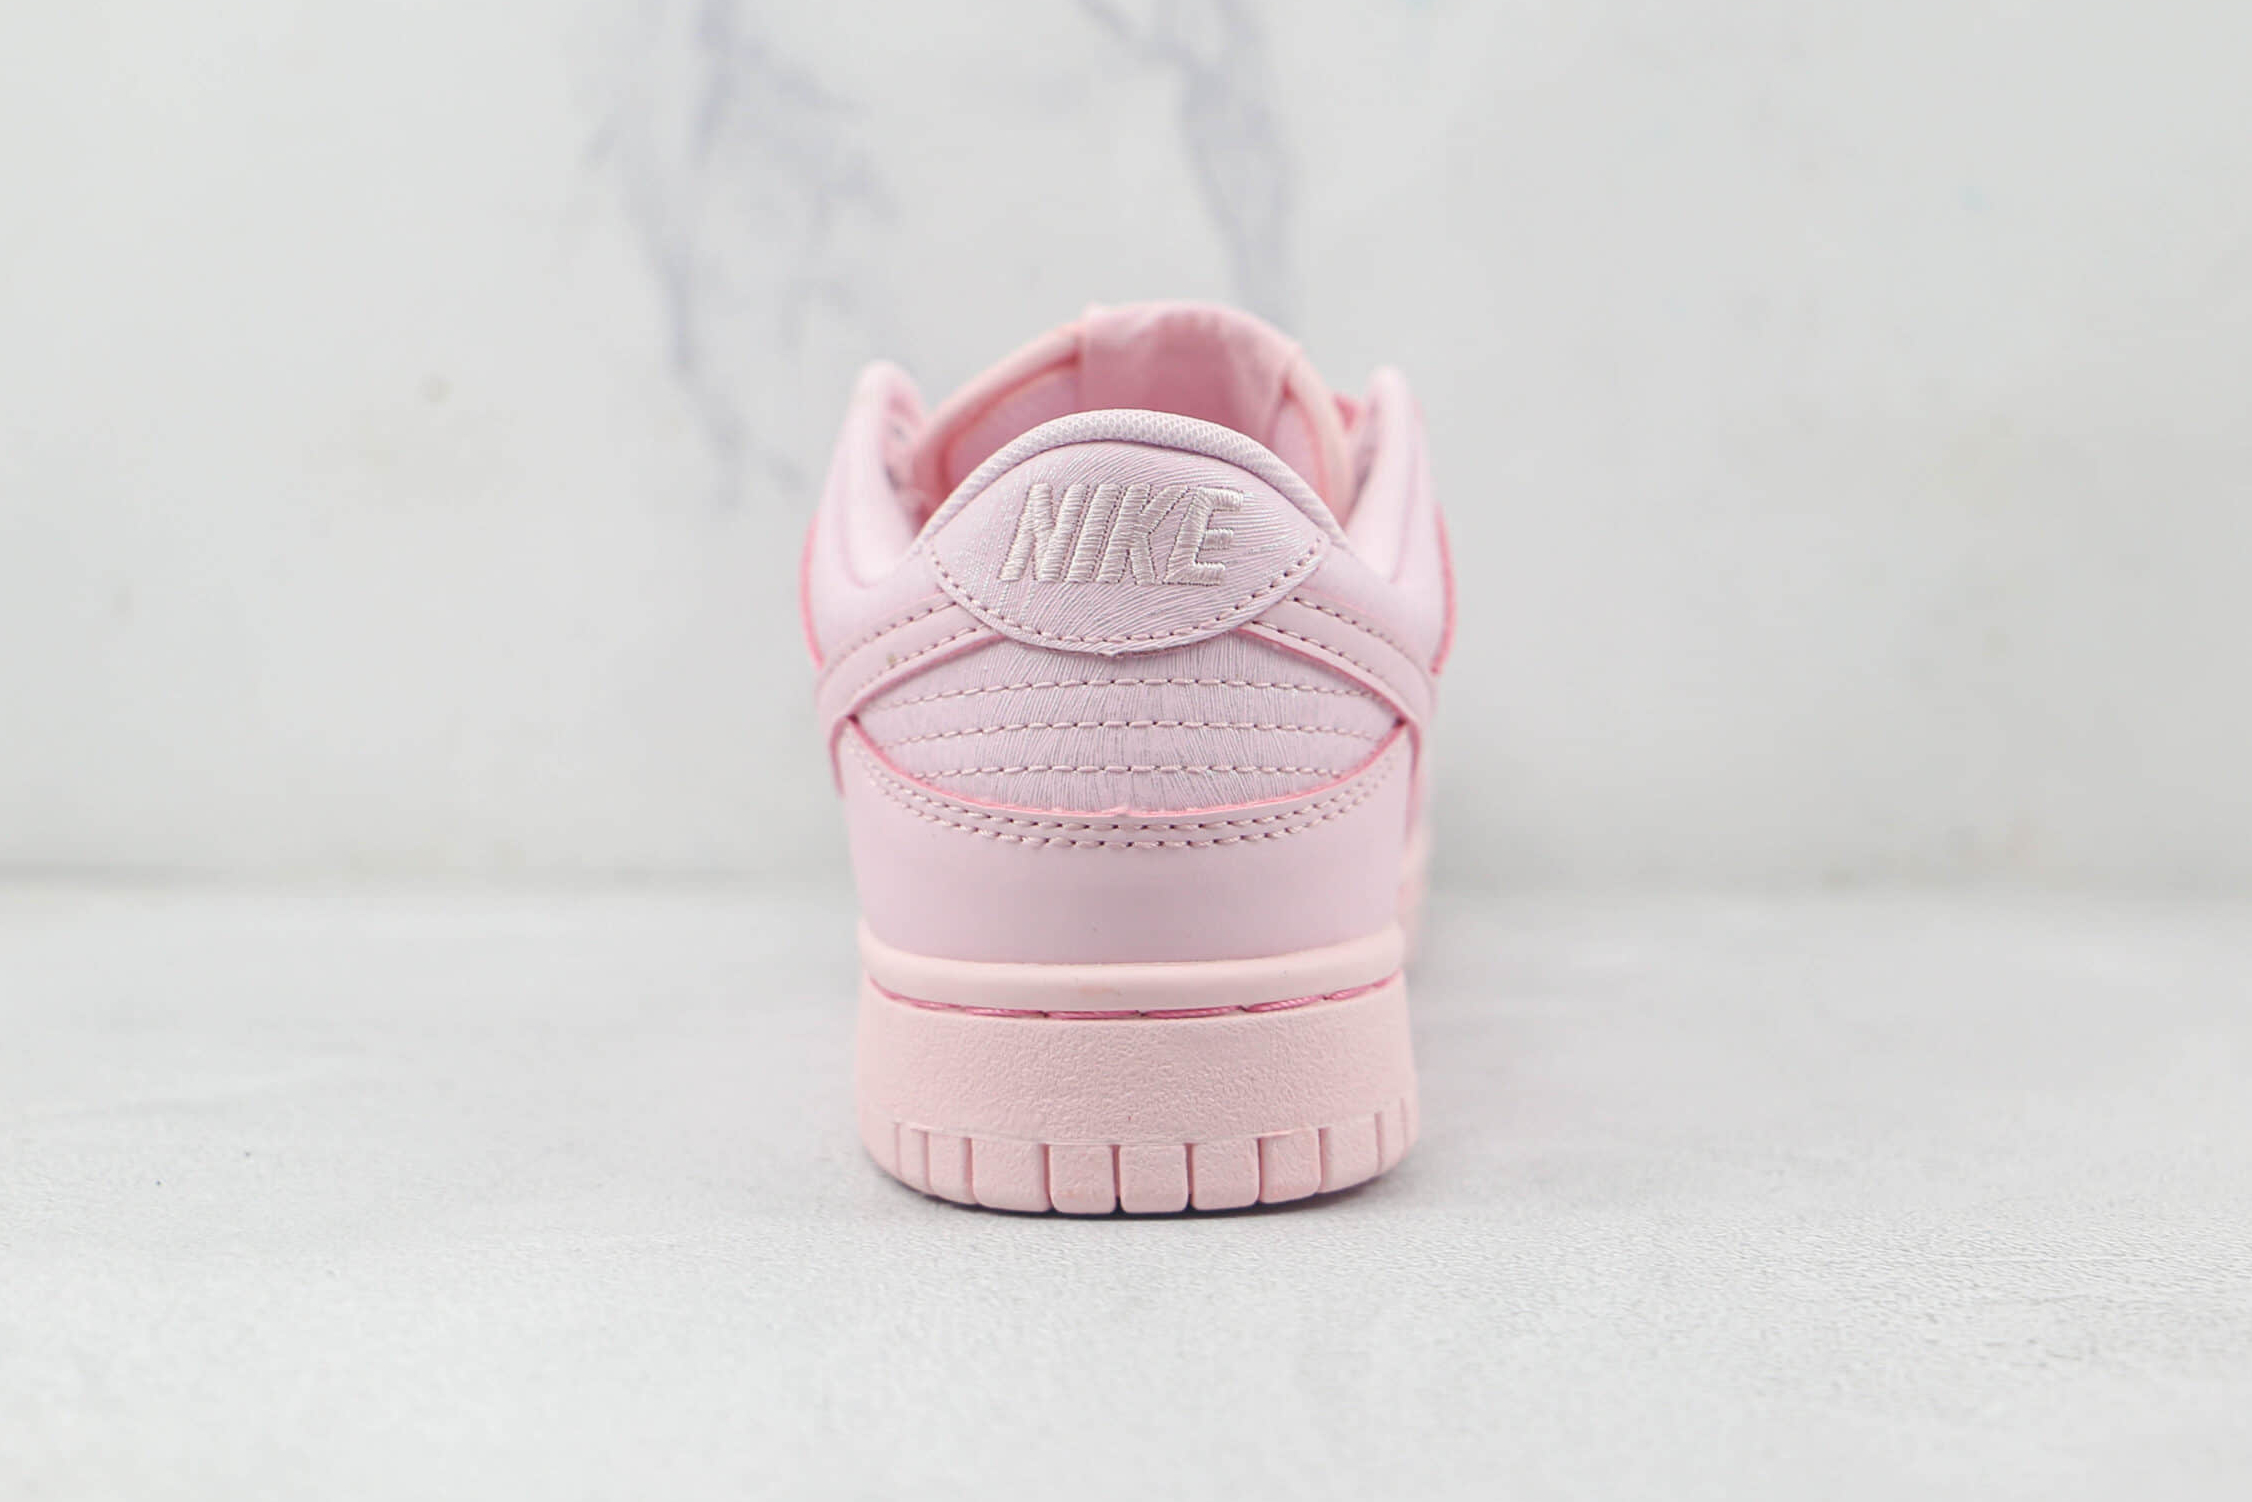 Nike Dunk Low SE 'Prism Pink' 921803-601 - Stylish and Vibrant Basketball Shoes